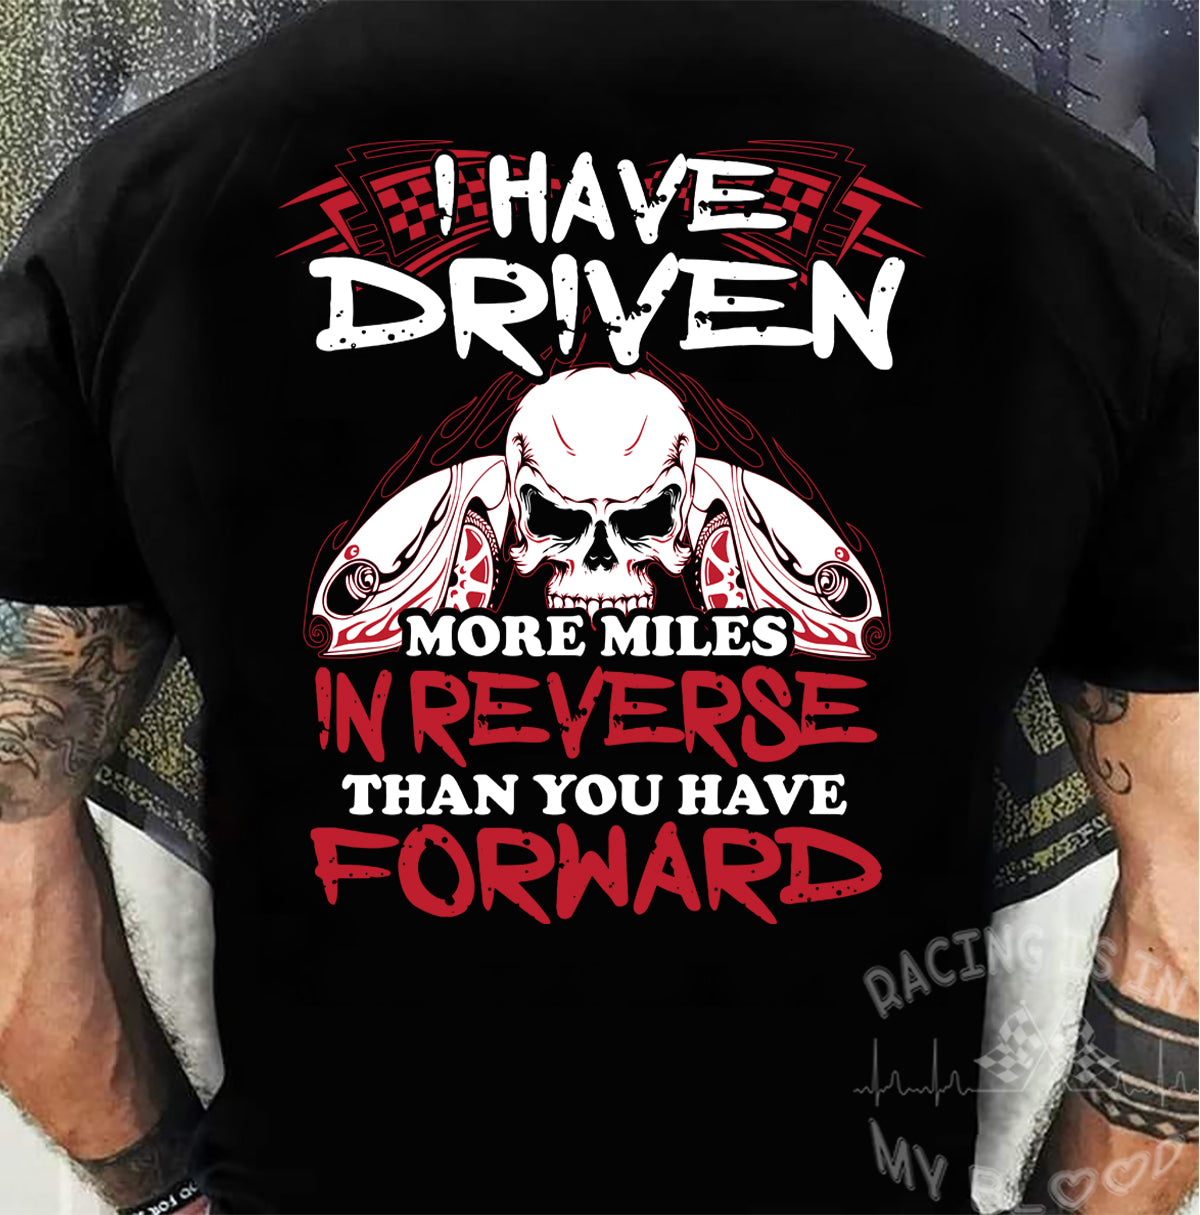 I Have Driven More Miles In Revers Than You In Forward T-Shirts!